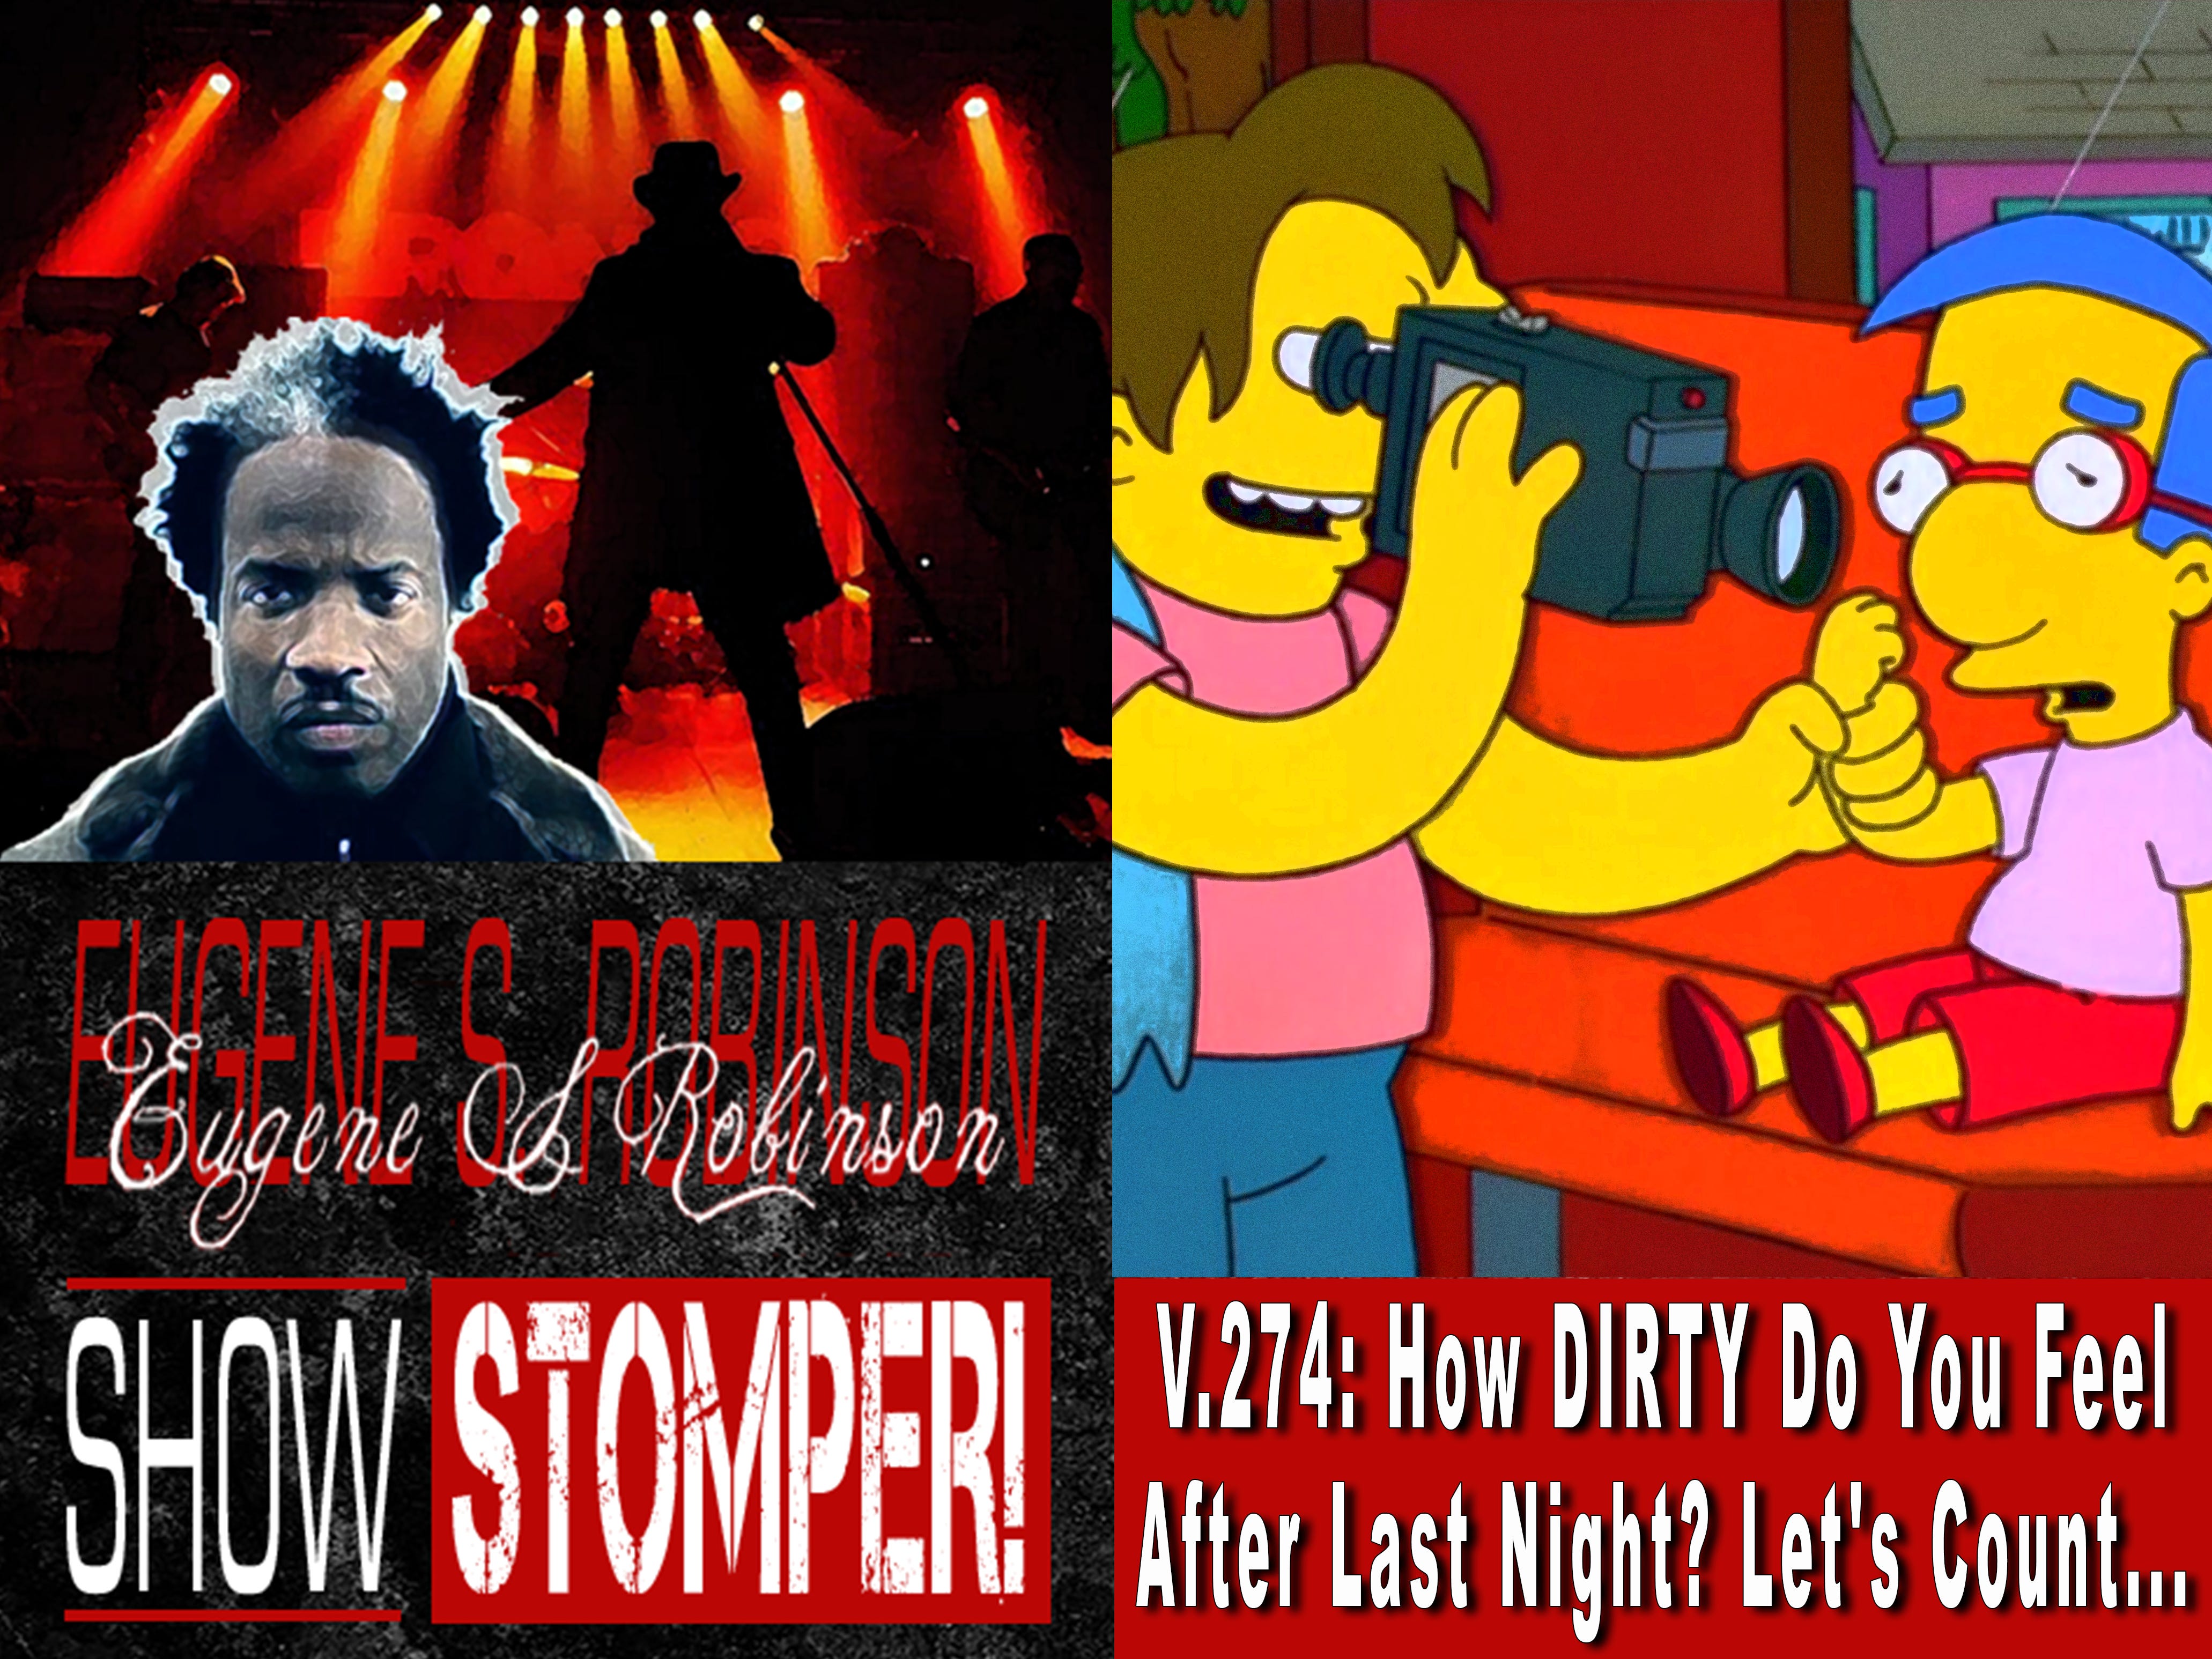 V.274: How DIRTY Do You Feel After Last Night? Let's Count...On The Eugene S. Robinson Show Stomper!